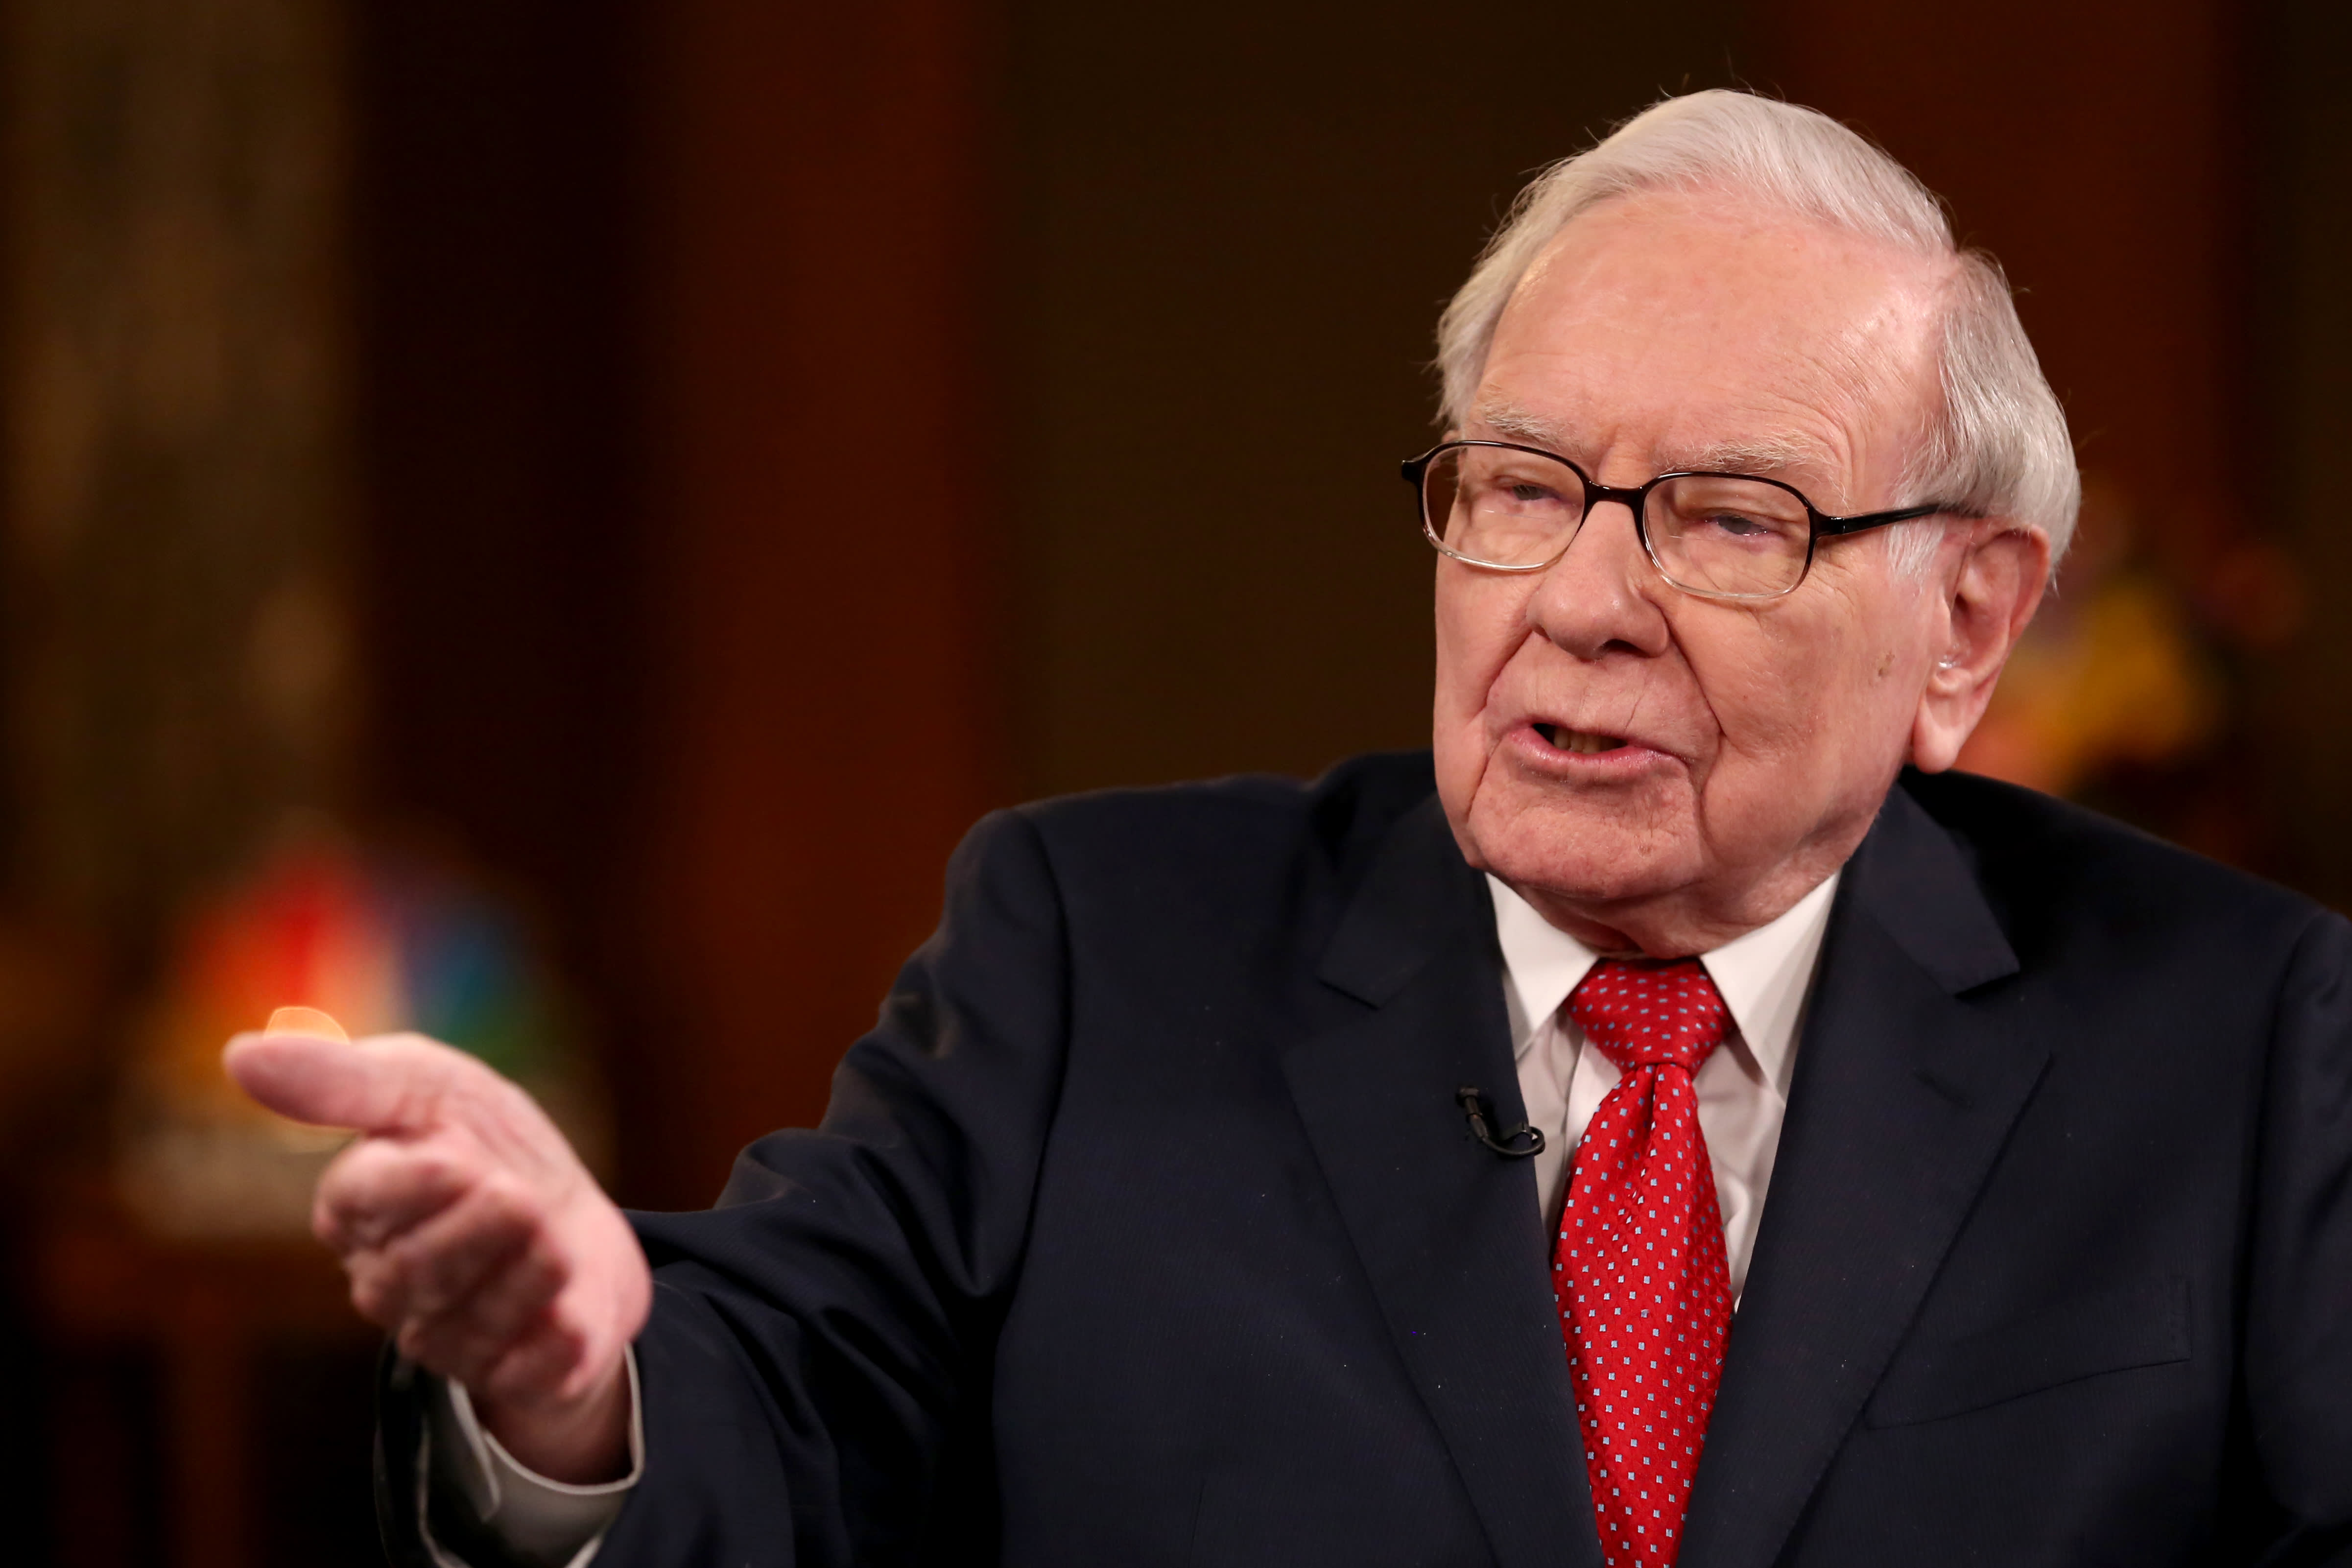 Buffett buys more Berkshire shares again this year after a record $ 25 billion buyback in 2020